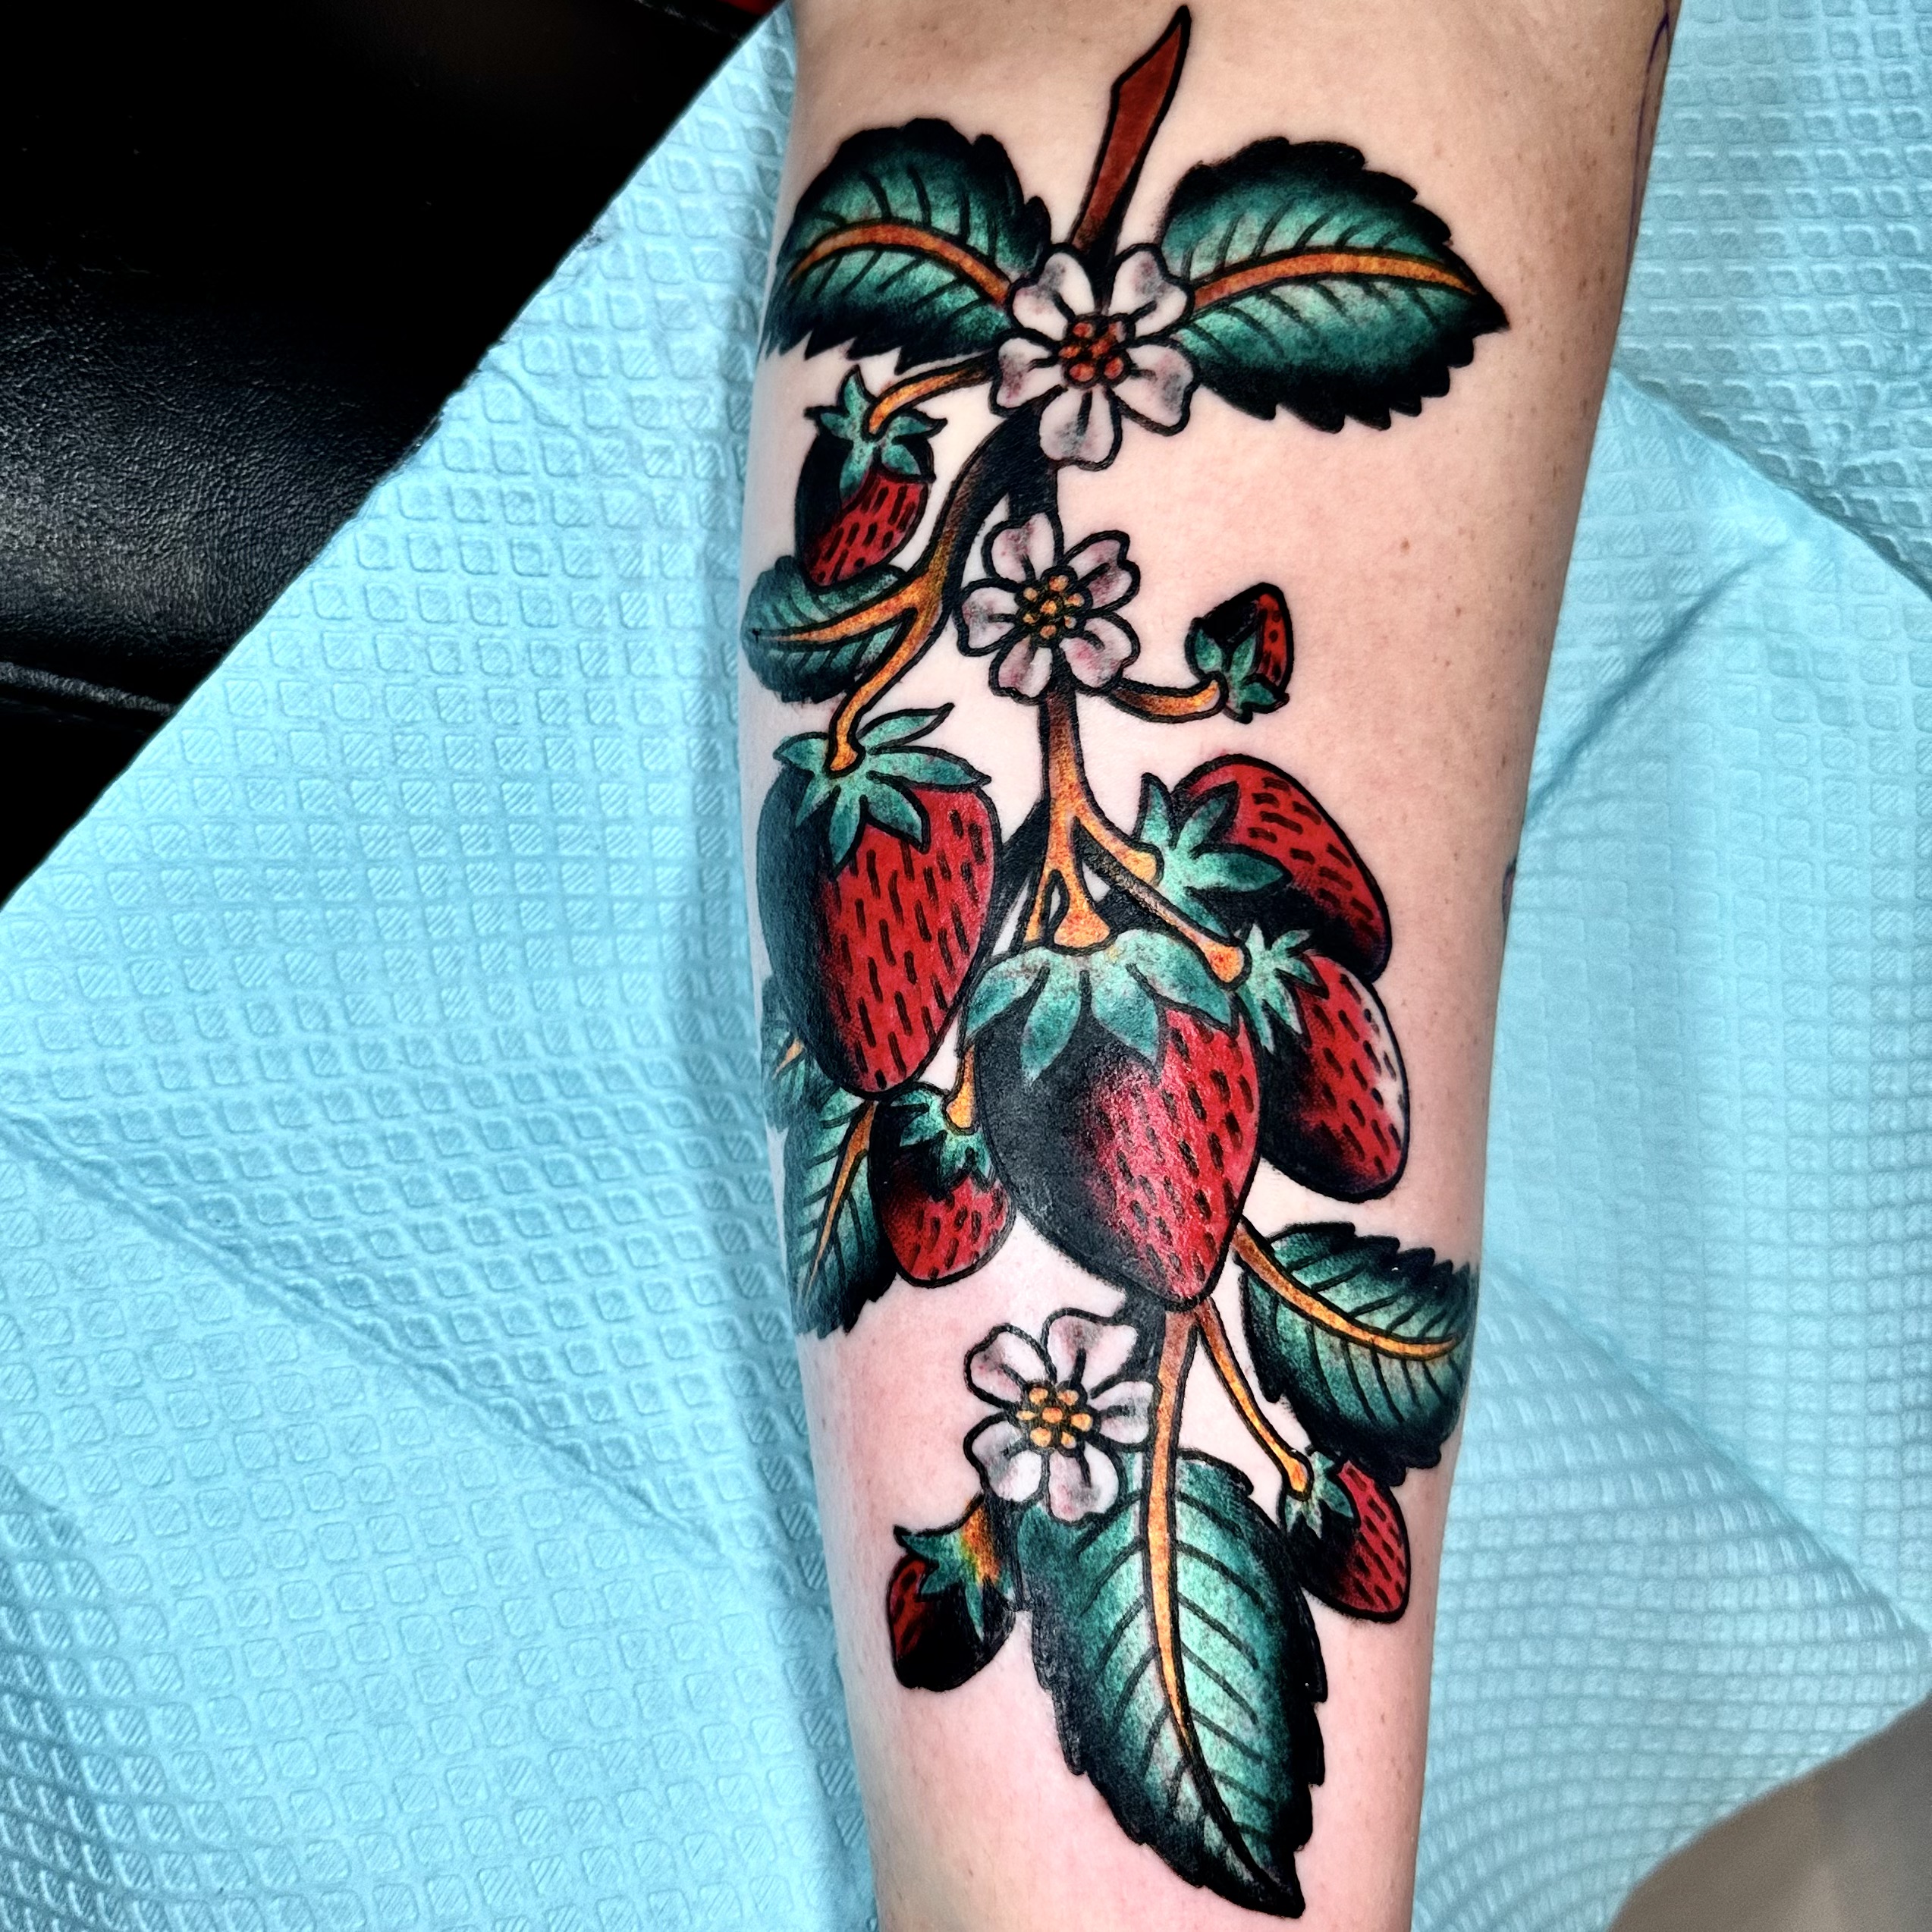 Tattooing of strawberries on a person’s arm